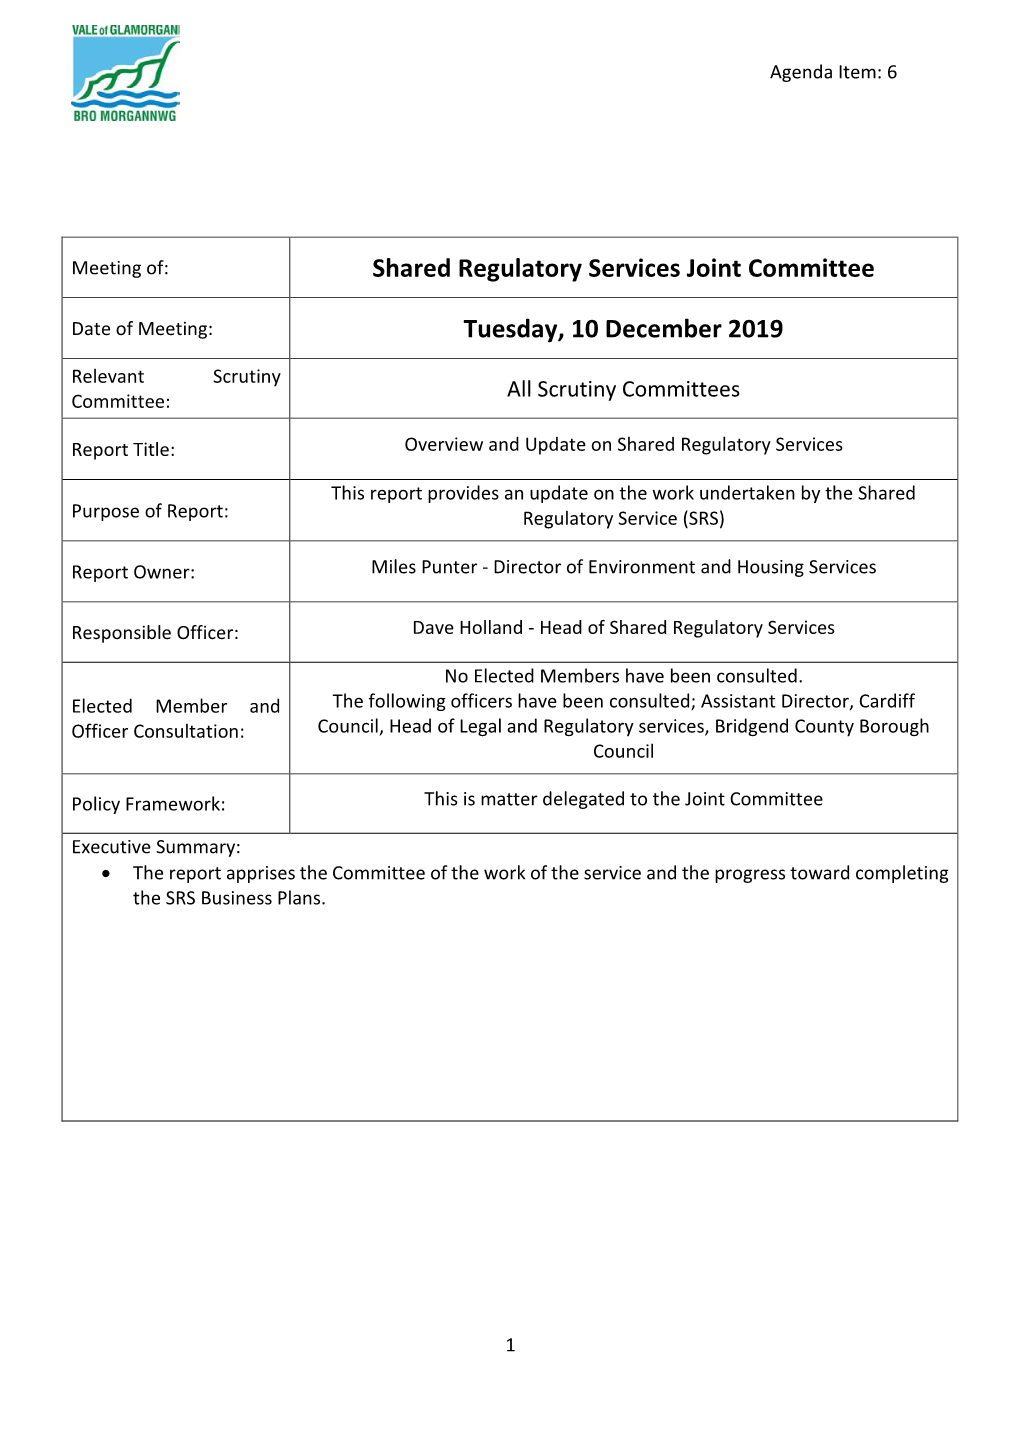 Overview and Update on Shared Regulatory Services